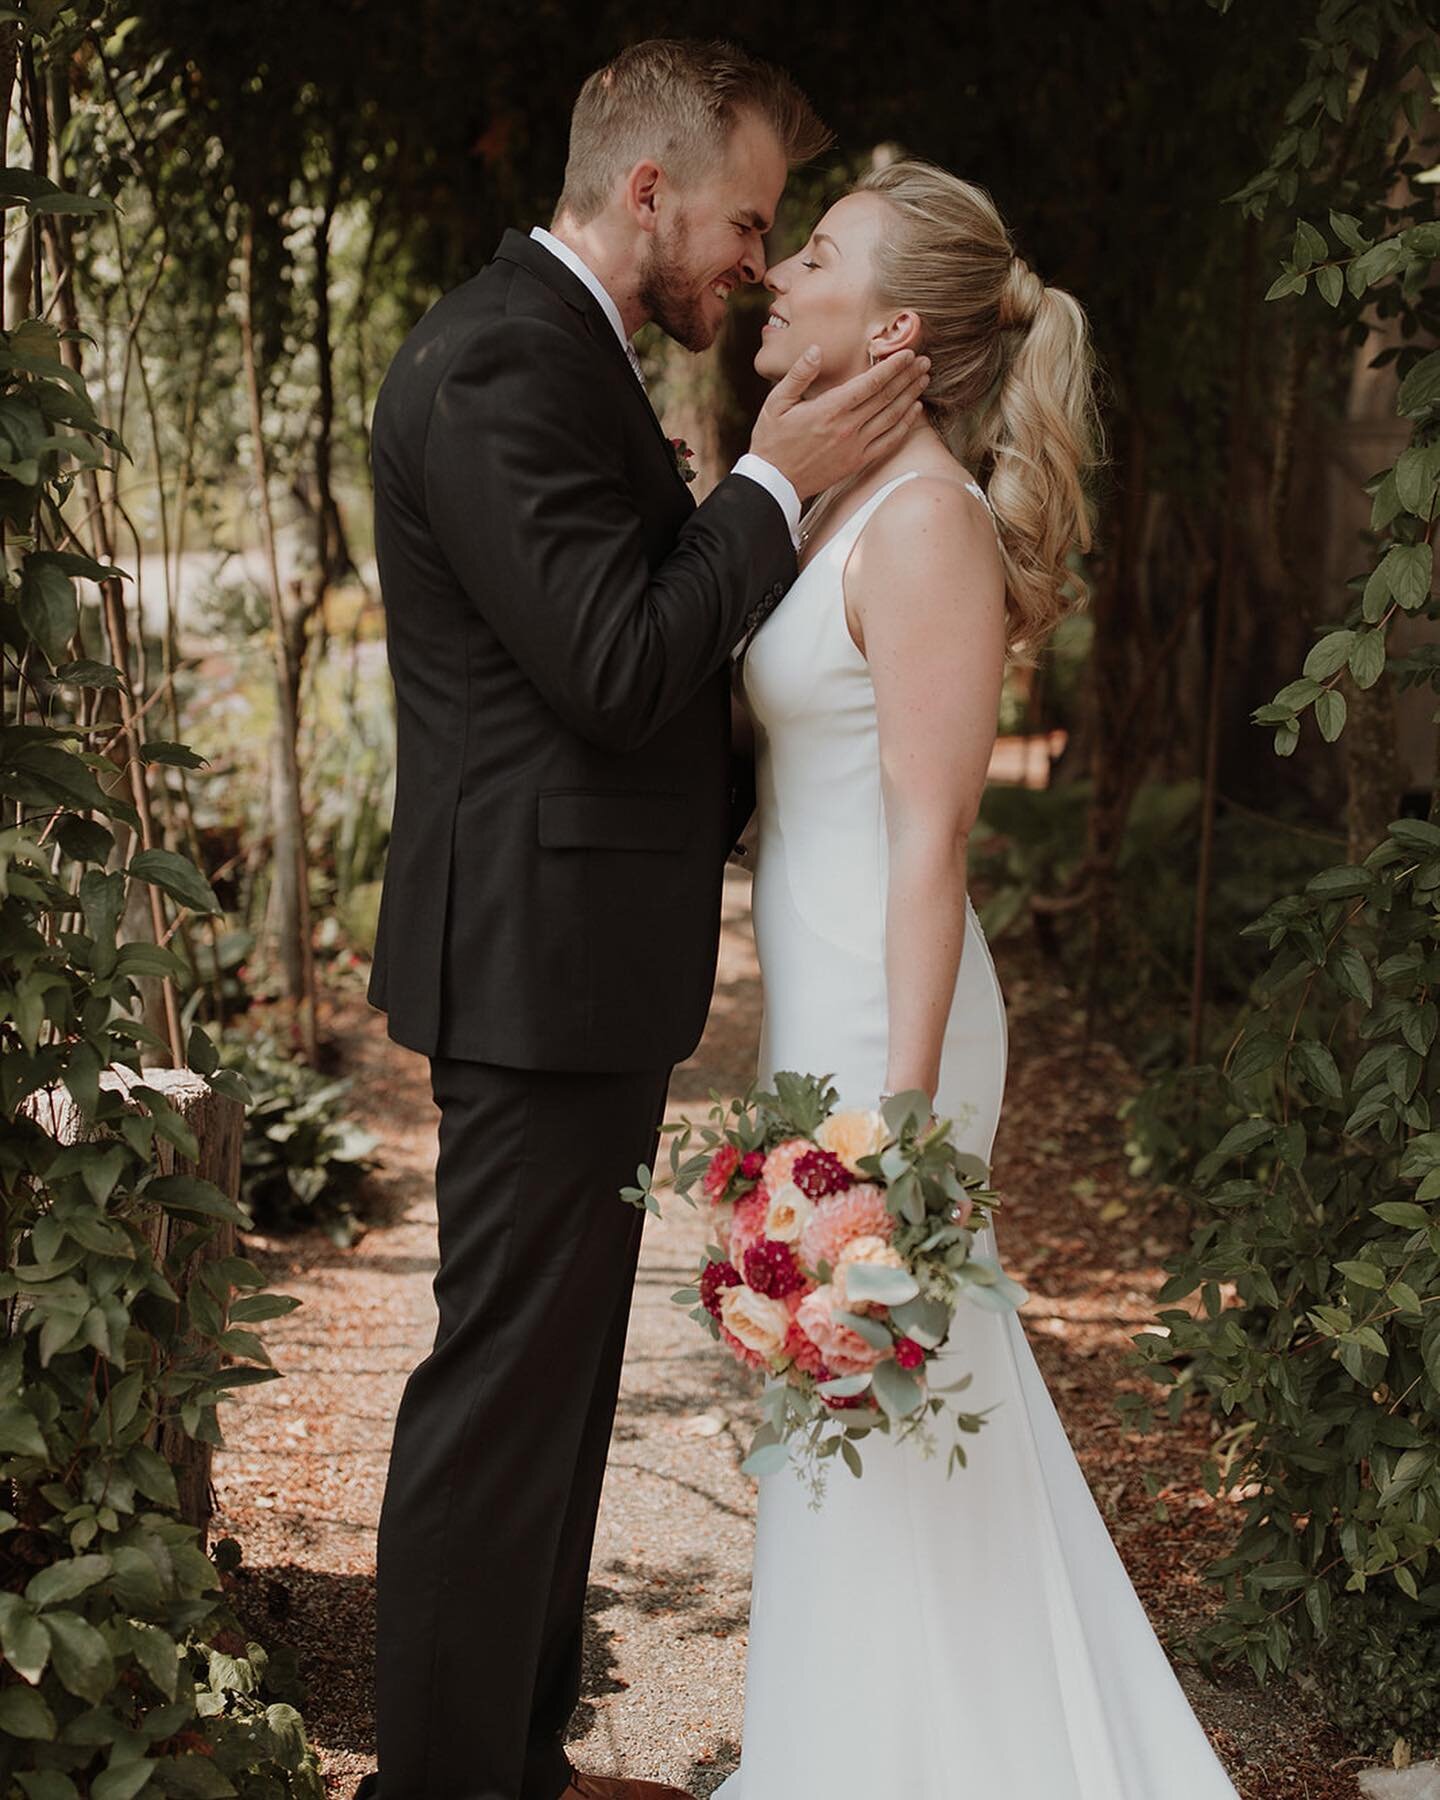 Can we just take a moment for this perfect ponytail and naturally radiant makeup?! Safe to say we&rsquo;re a little obsessed with this look 😍

Photo: @maloriekerouac__ 
&bull; 

#oregonbride #oregonbridemag #portlandwedding  #pdxwedding #pdxmakeupar